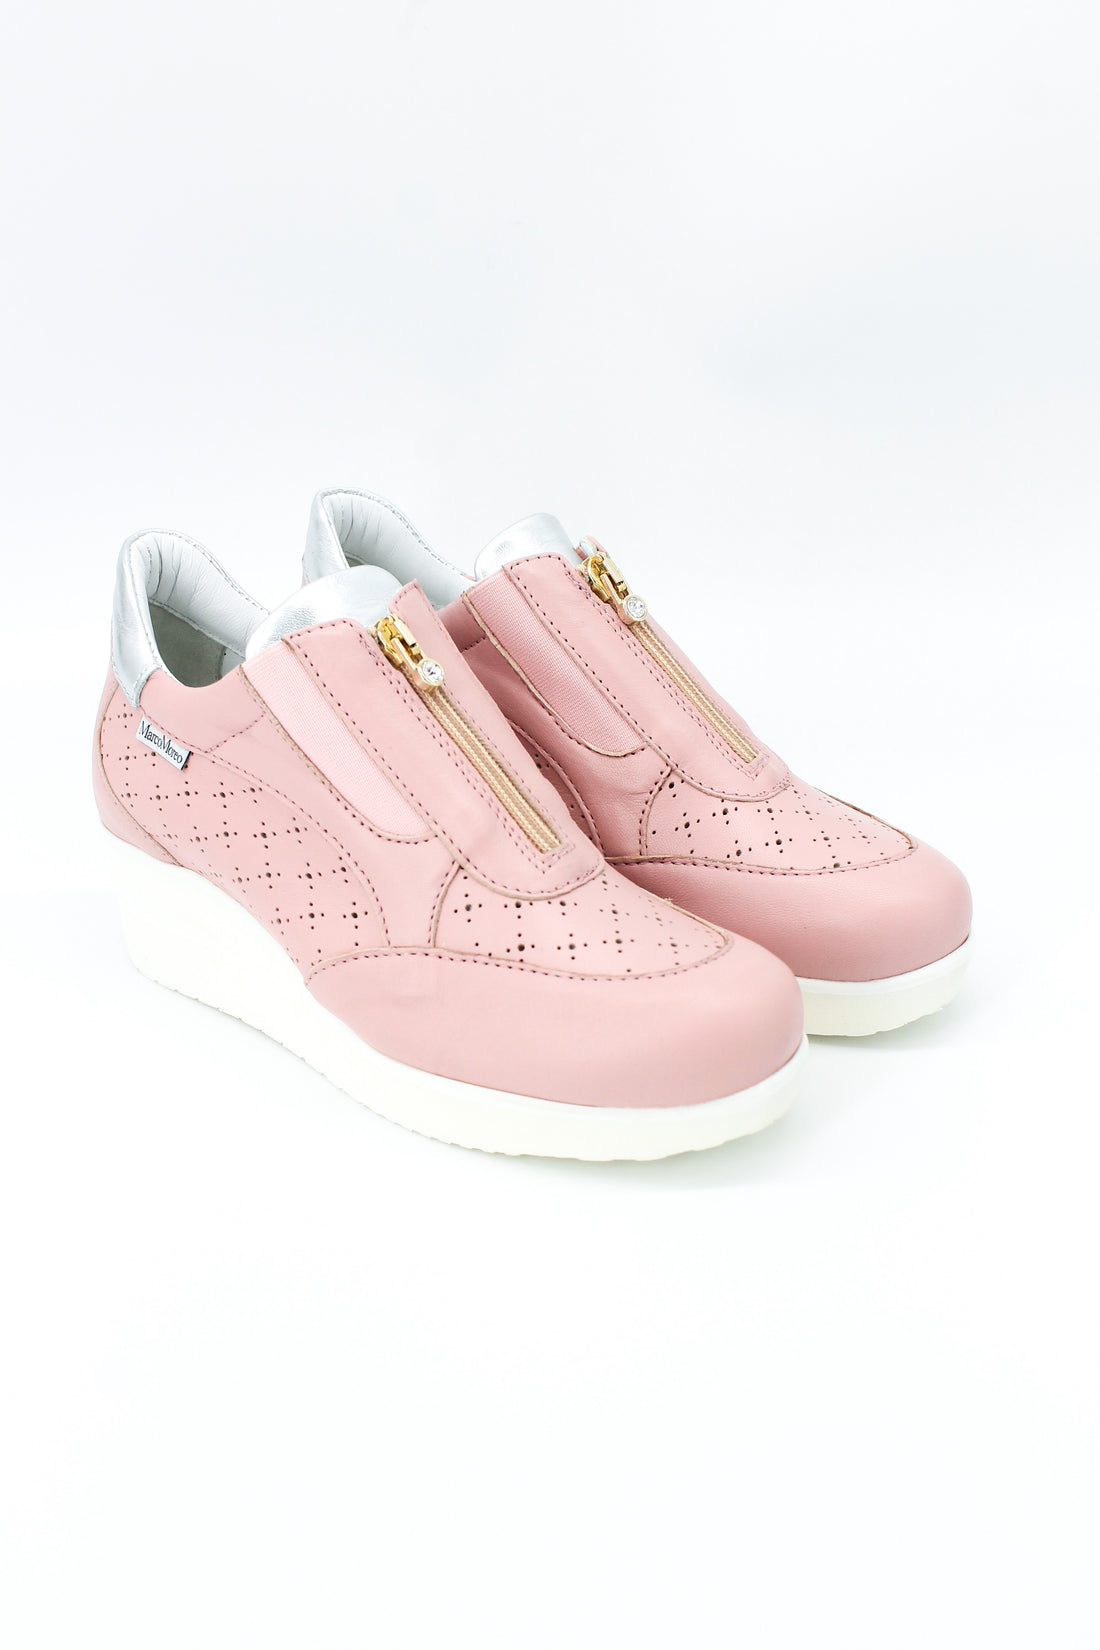 Marco Moreo 805 SS23 Pink